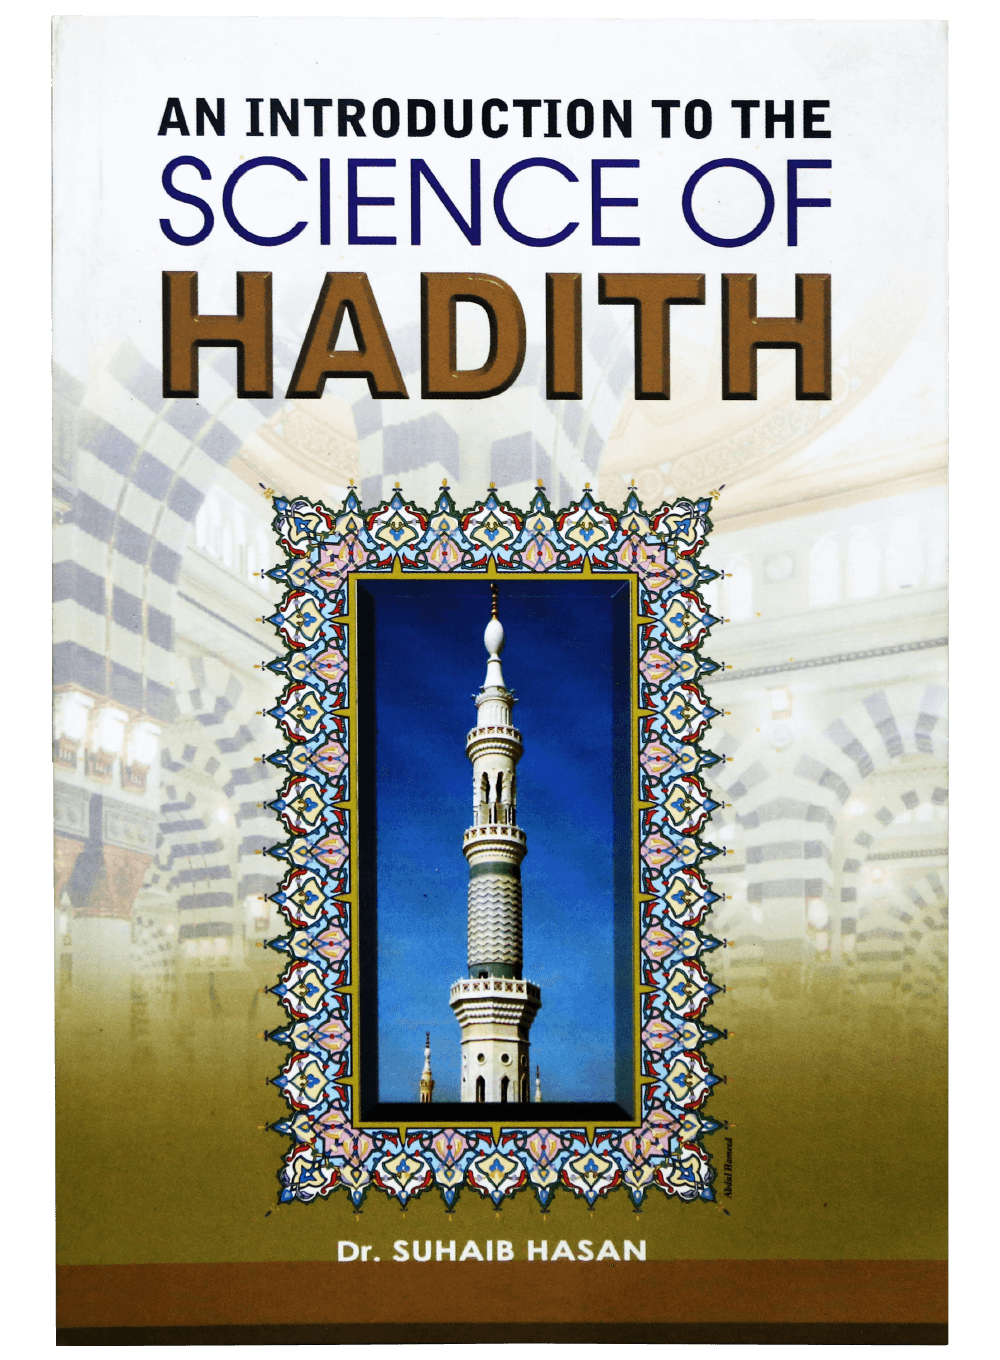 an-introduction-of-science-of-hadith-darussalam-20180411-165351